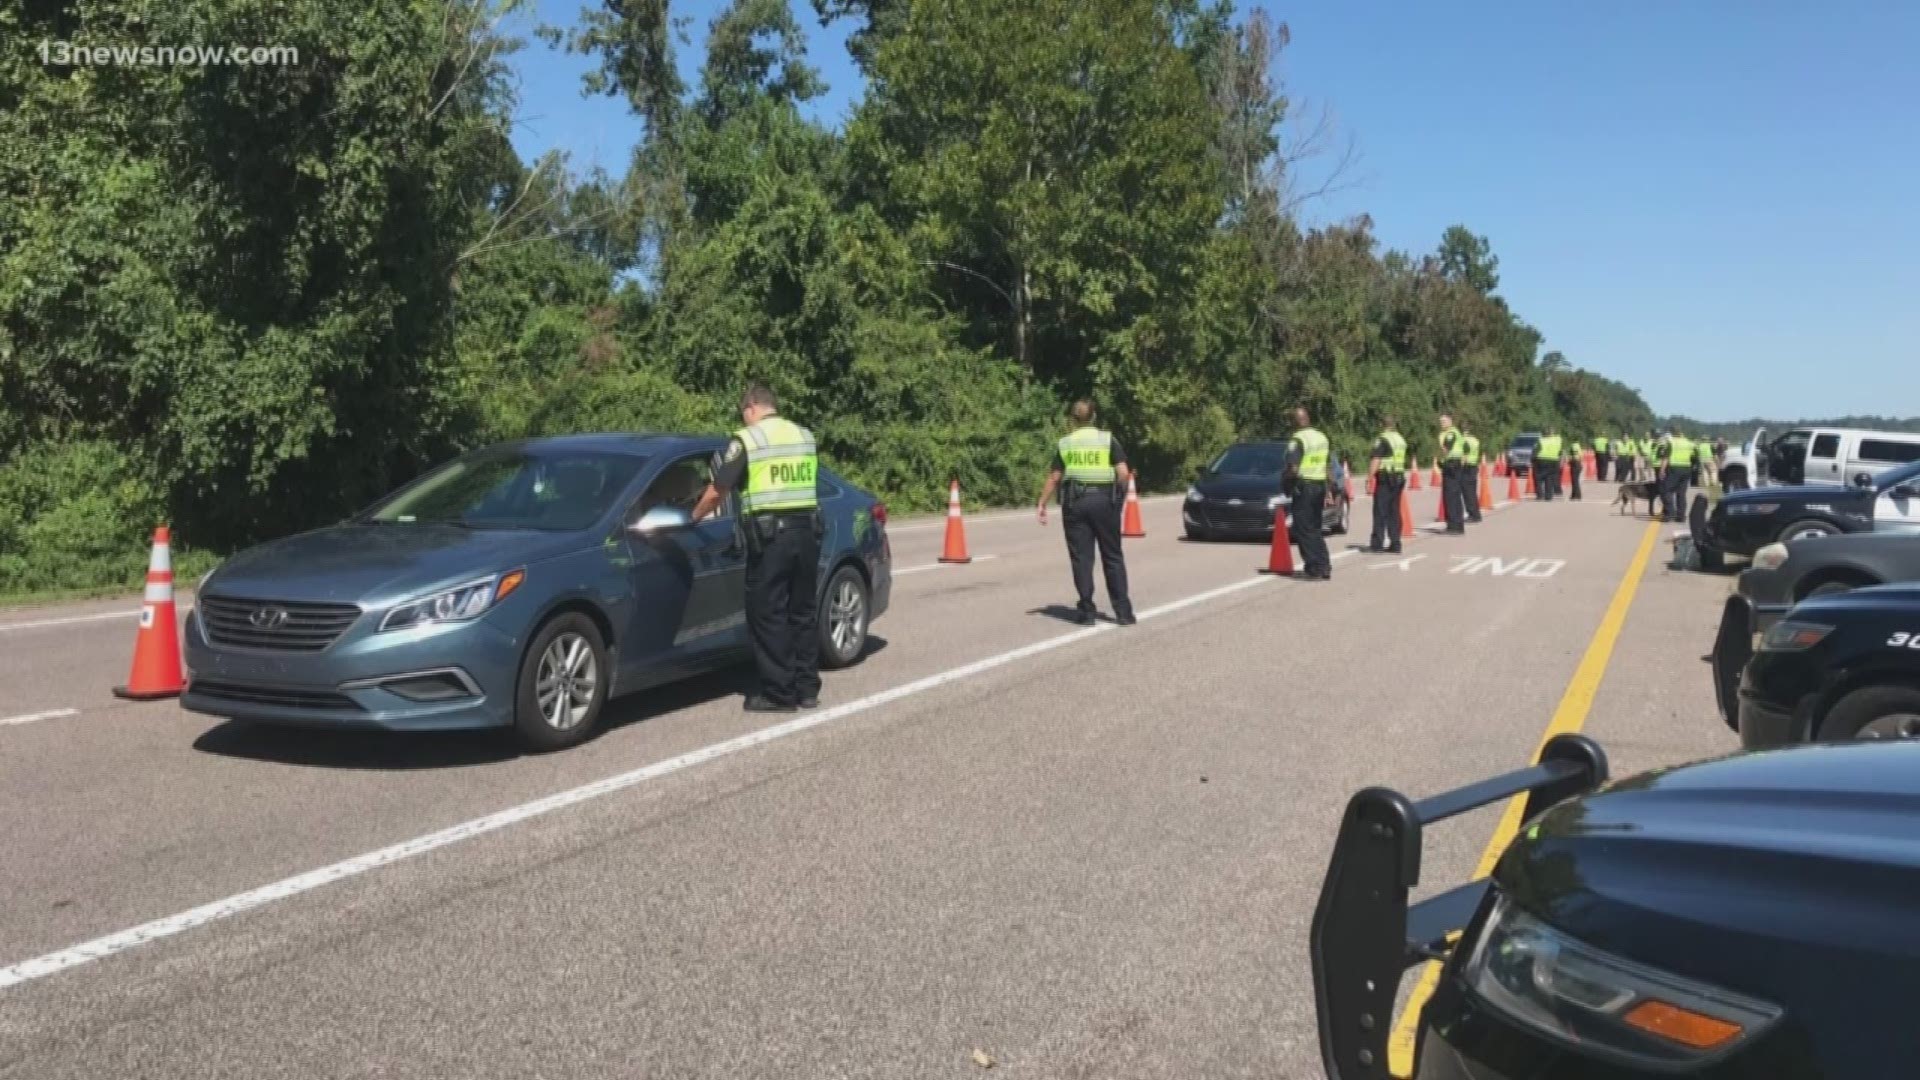 Dozens of police officers were pulling drivers open at random Thursday ahead of the holiday weekend. The checkpoint is part of Border to Border, part of Operation Checkpoint Strikeforce.